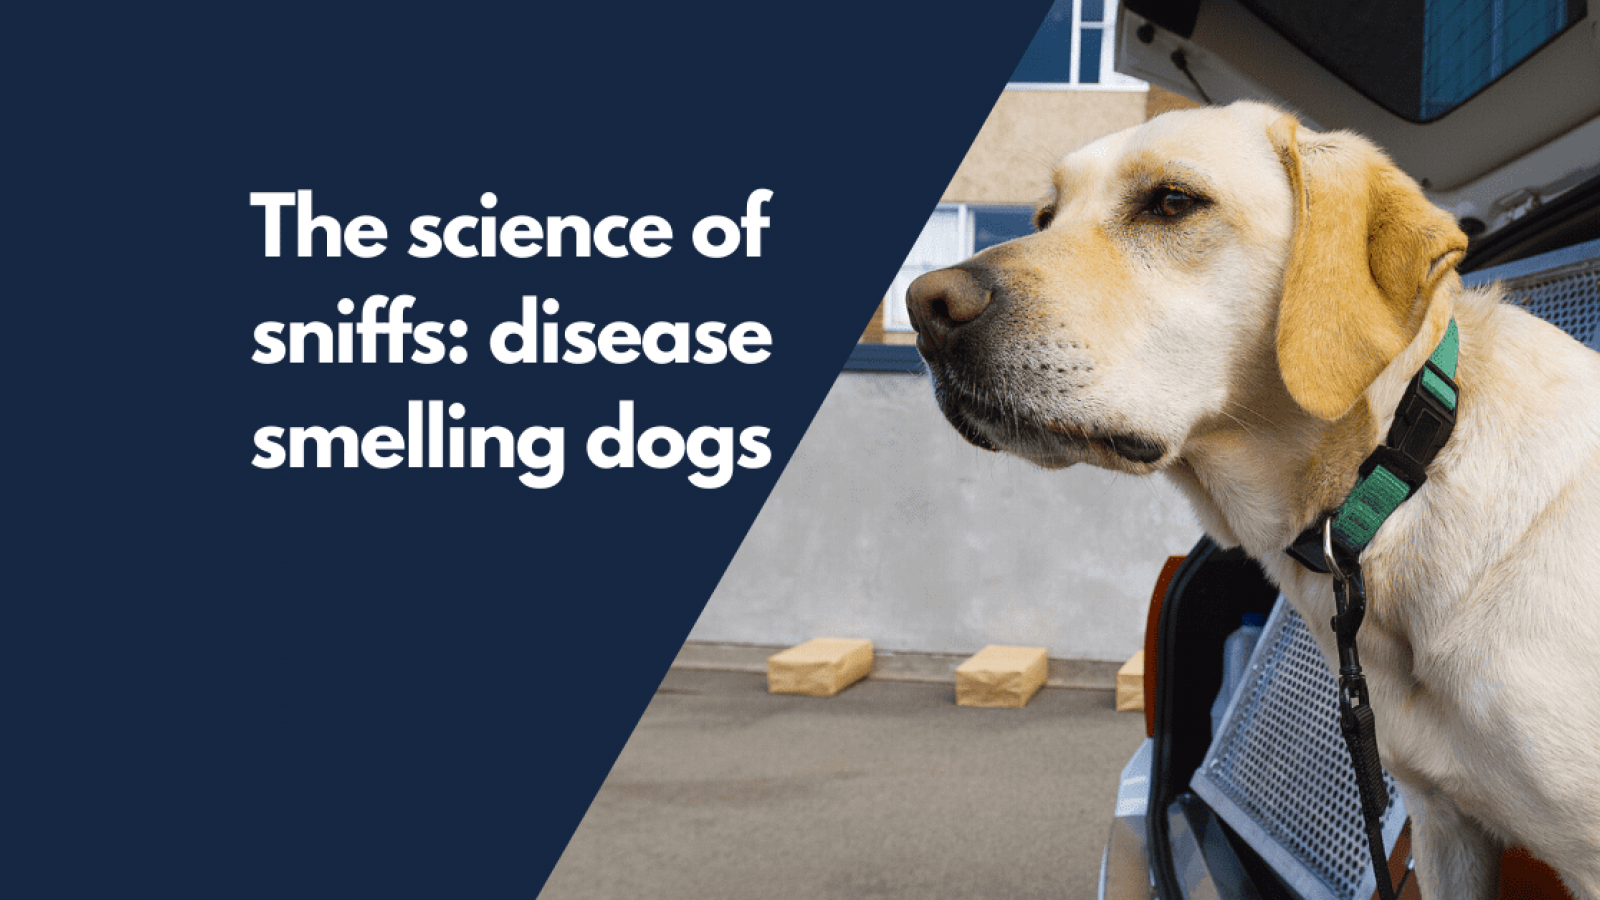 https://www.understandinganimalresearch.org.uk/application/files/thumbnails/page_2x/5415/9257/8199/Dogs_sniffing_disease.png